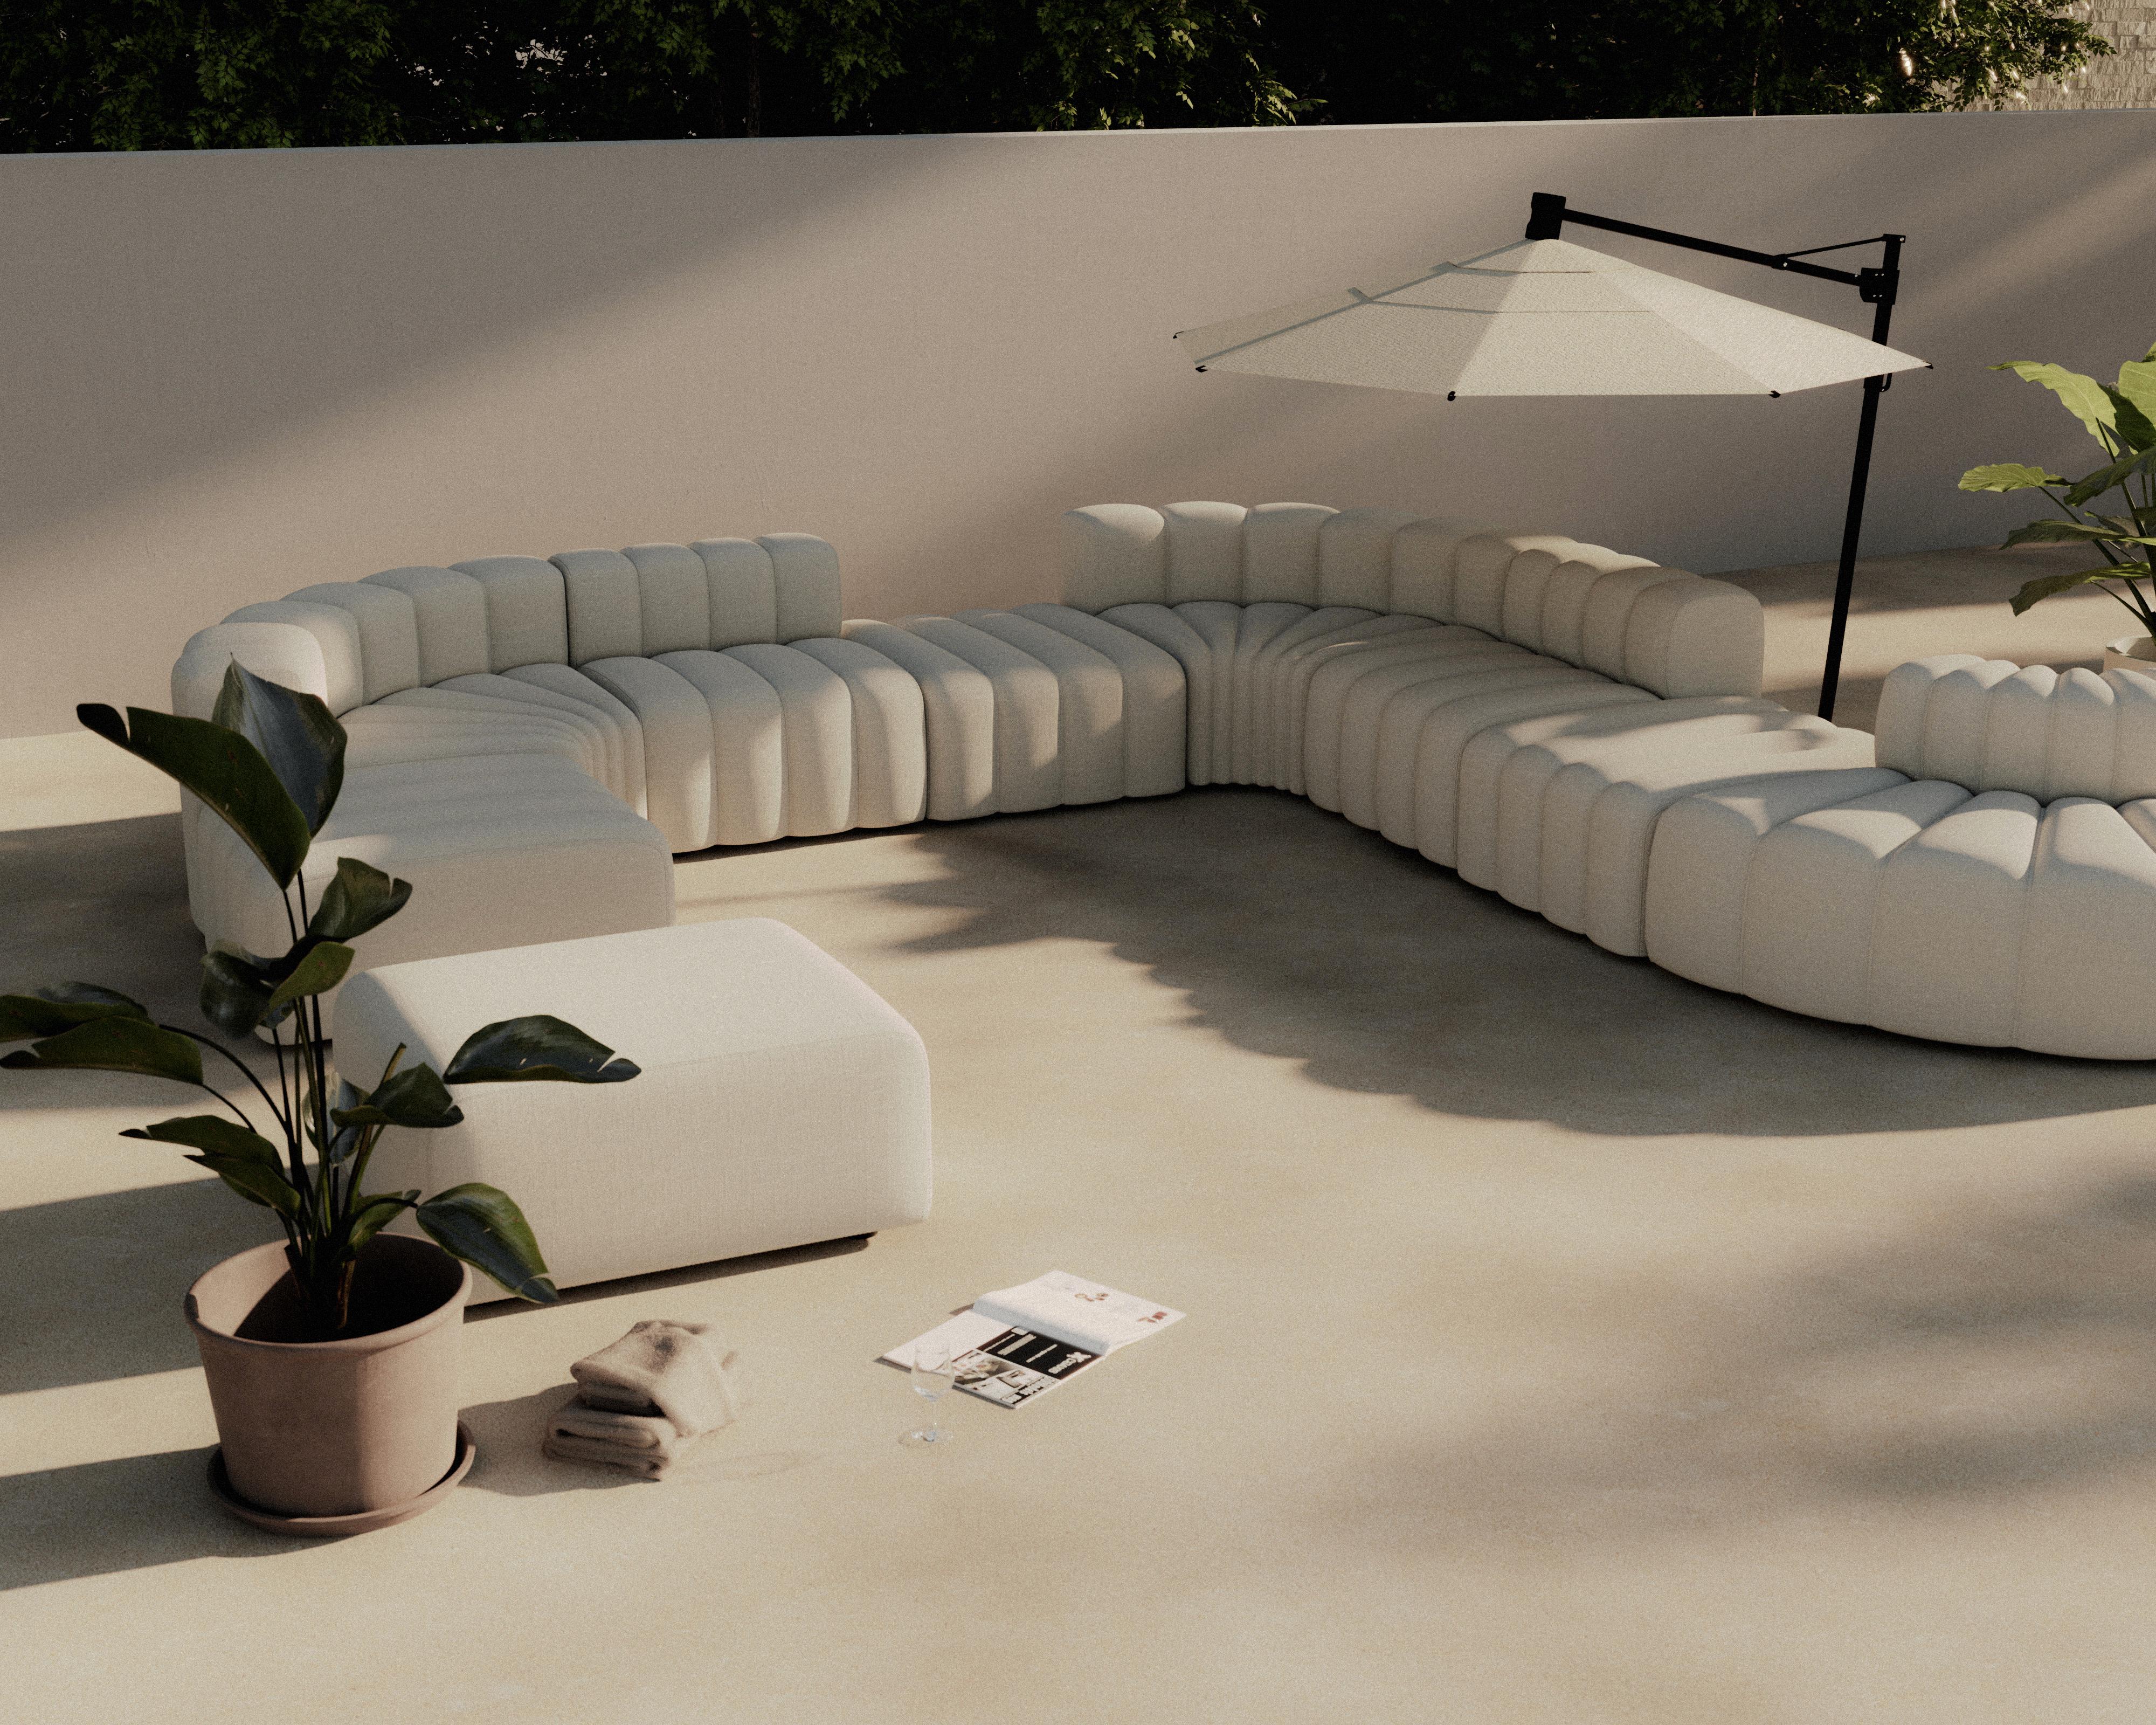 Outdoor Ottoman 'Studio' by Norr11, Modular Sofa, Classic, Coconut For Sale 2